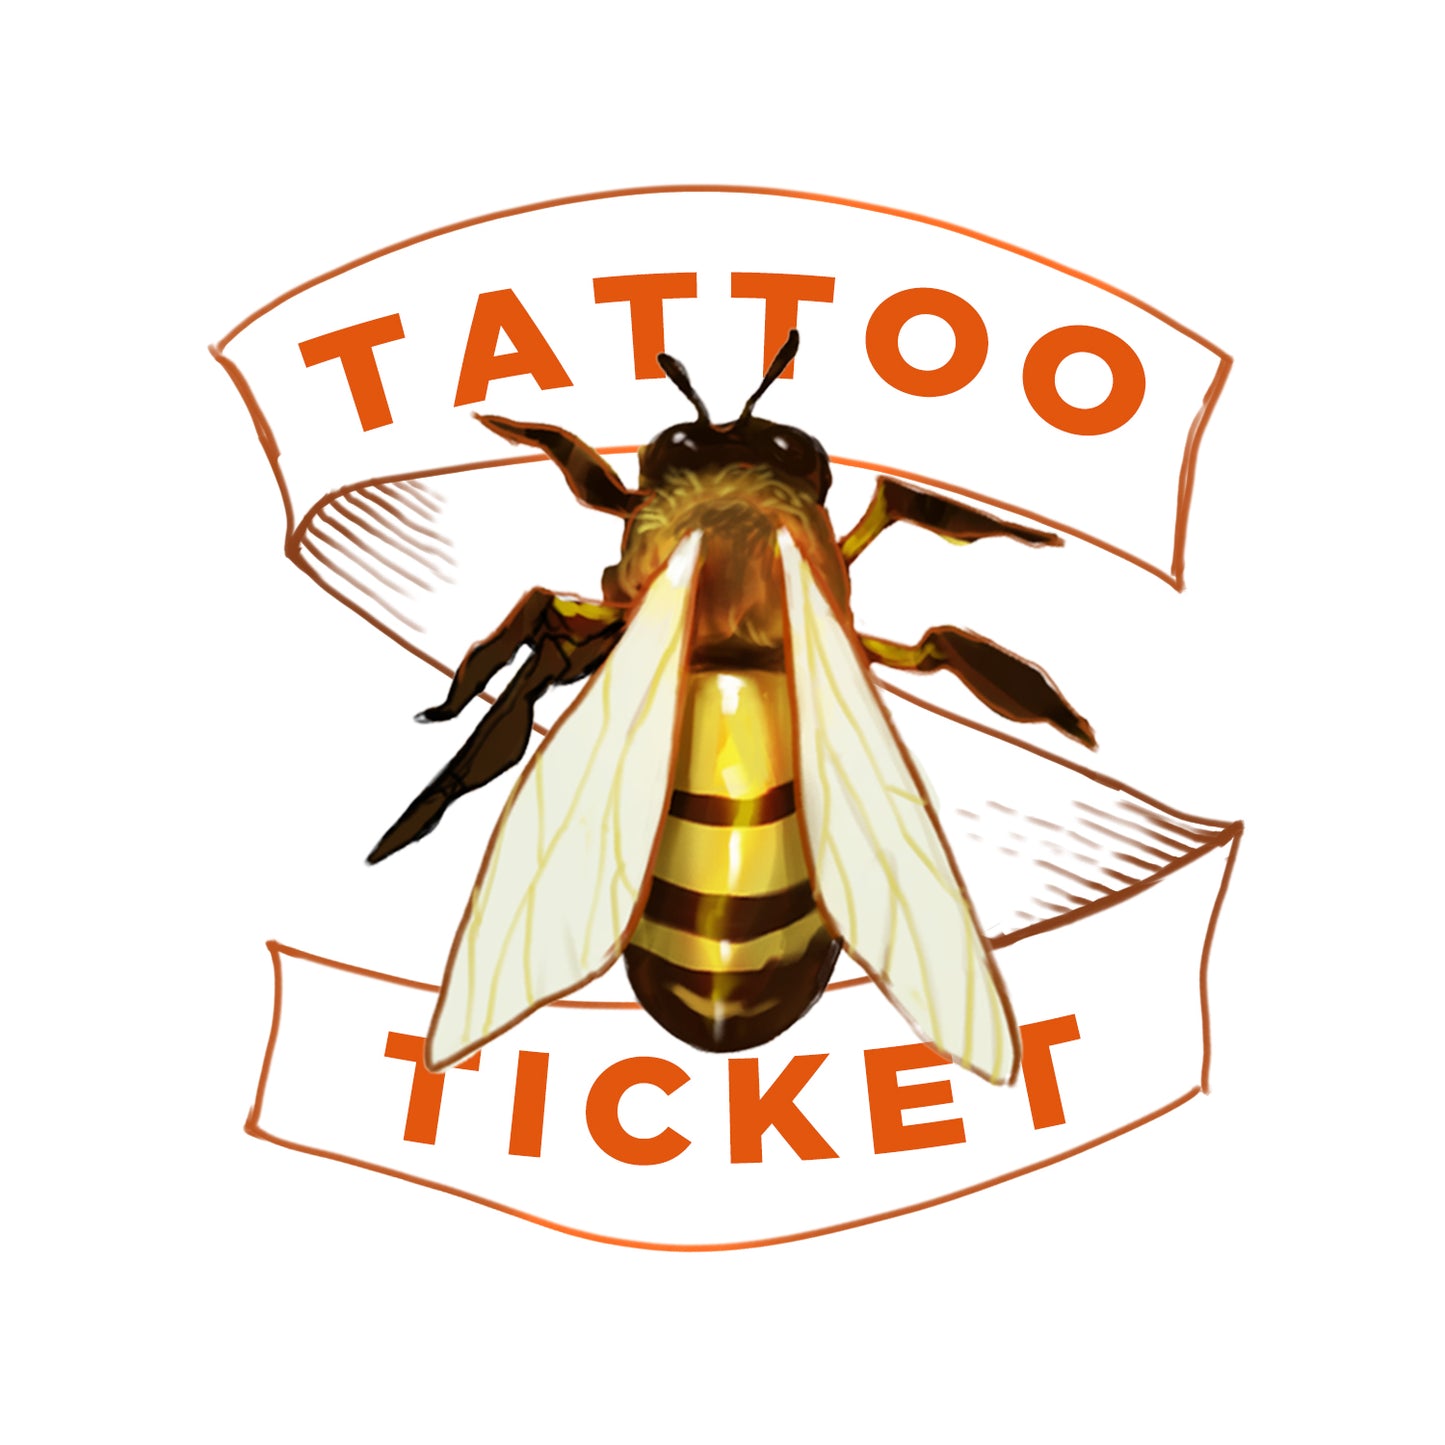 Official Tattoo Ticket